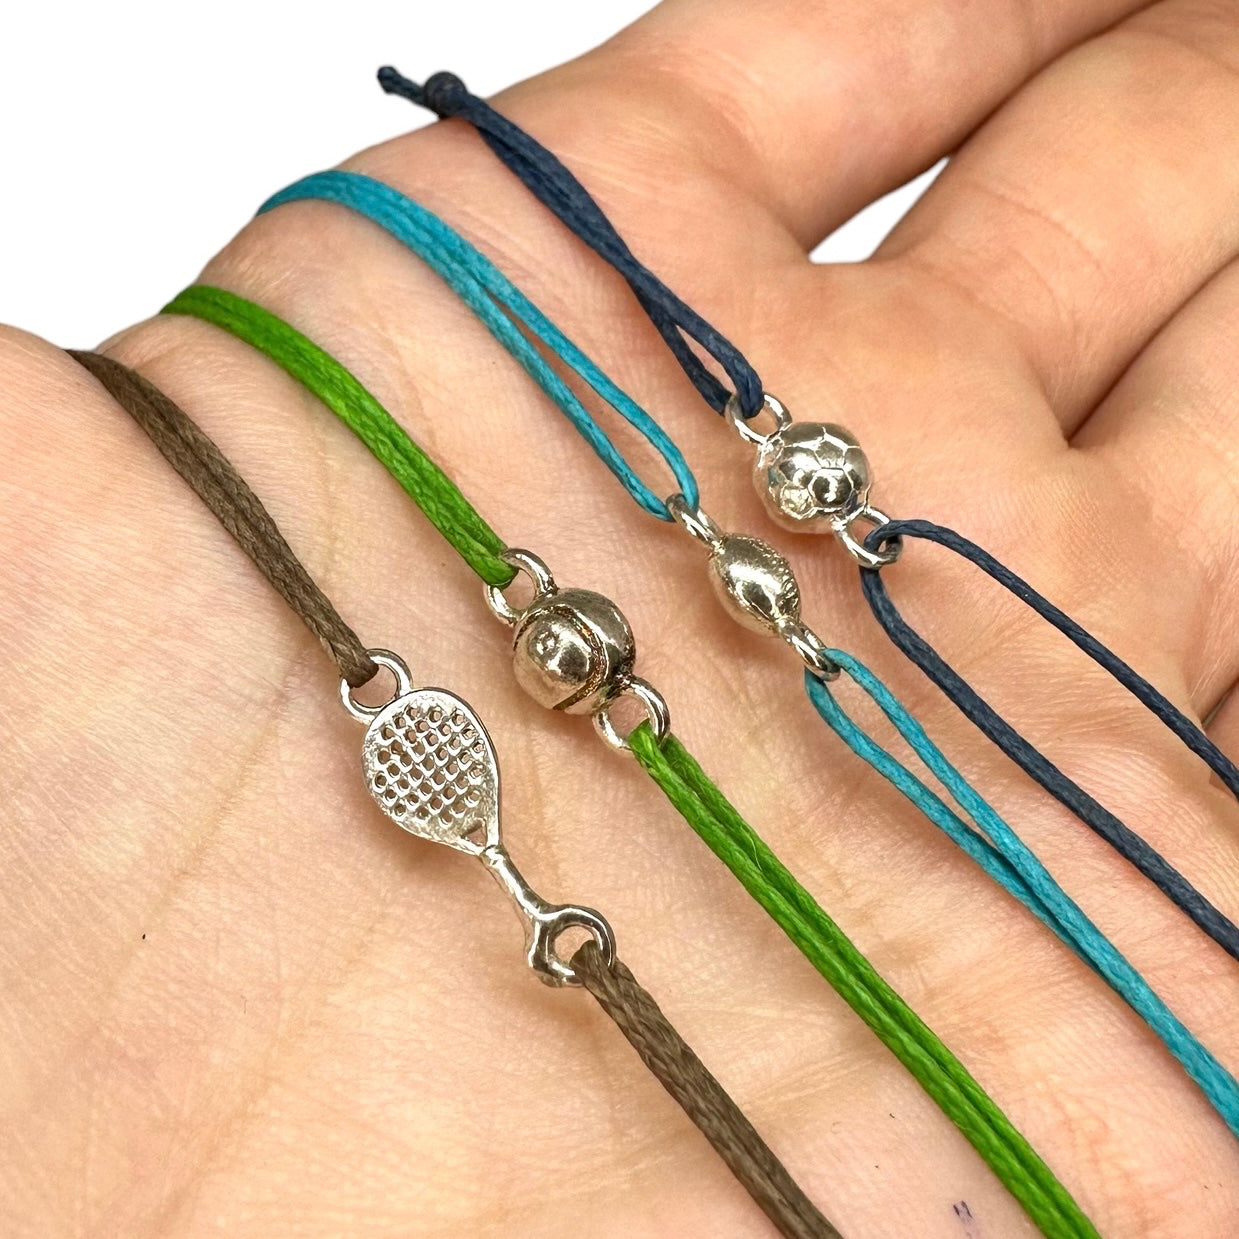 Wire bracelet with different sports